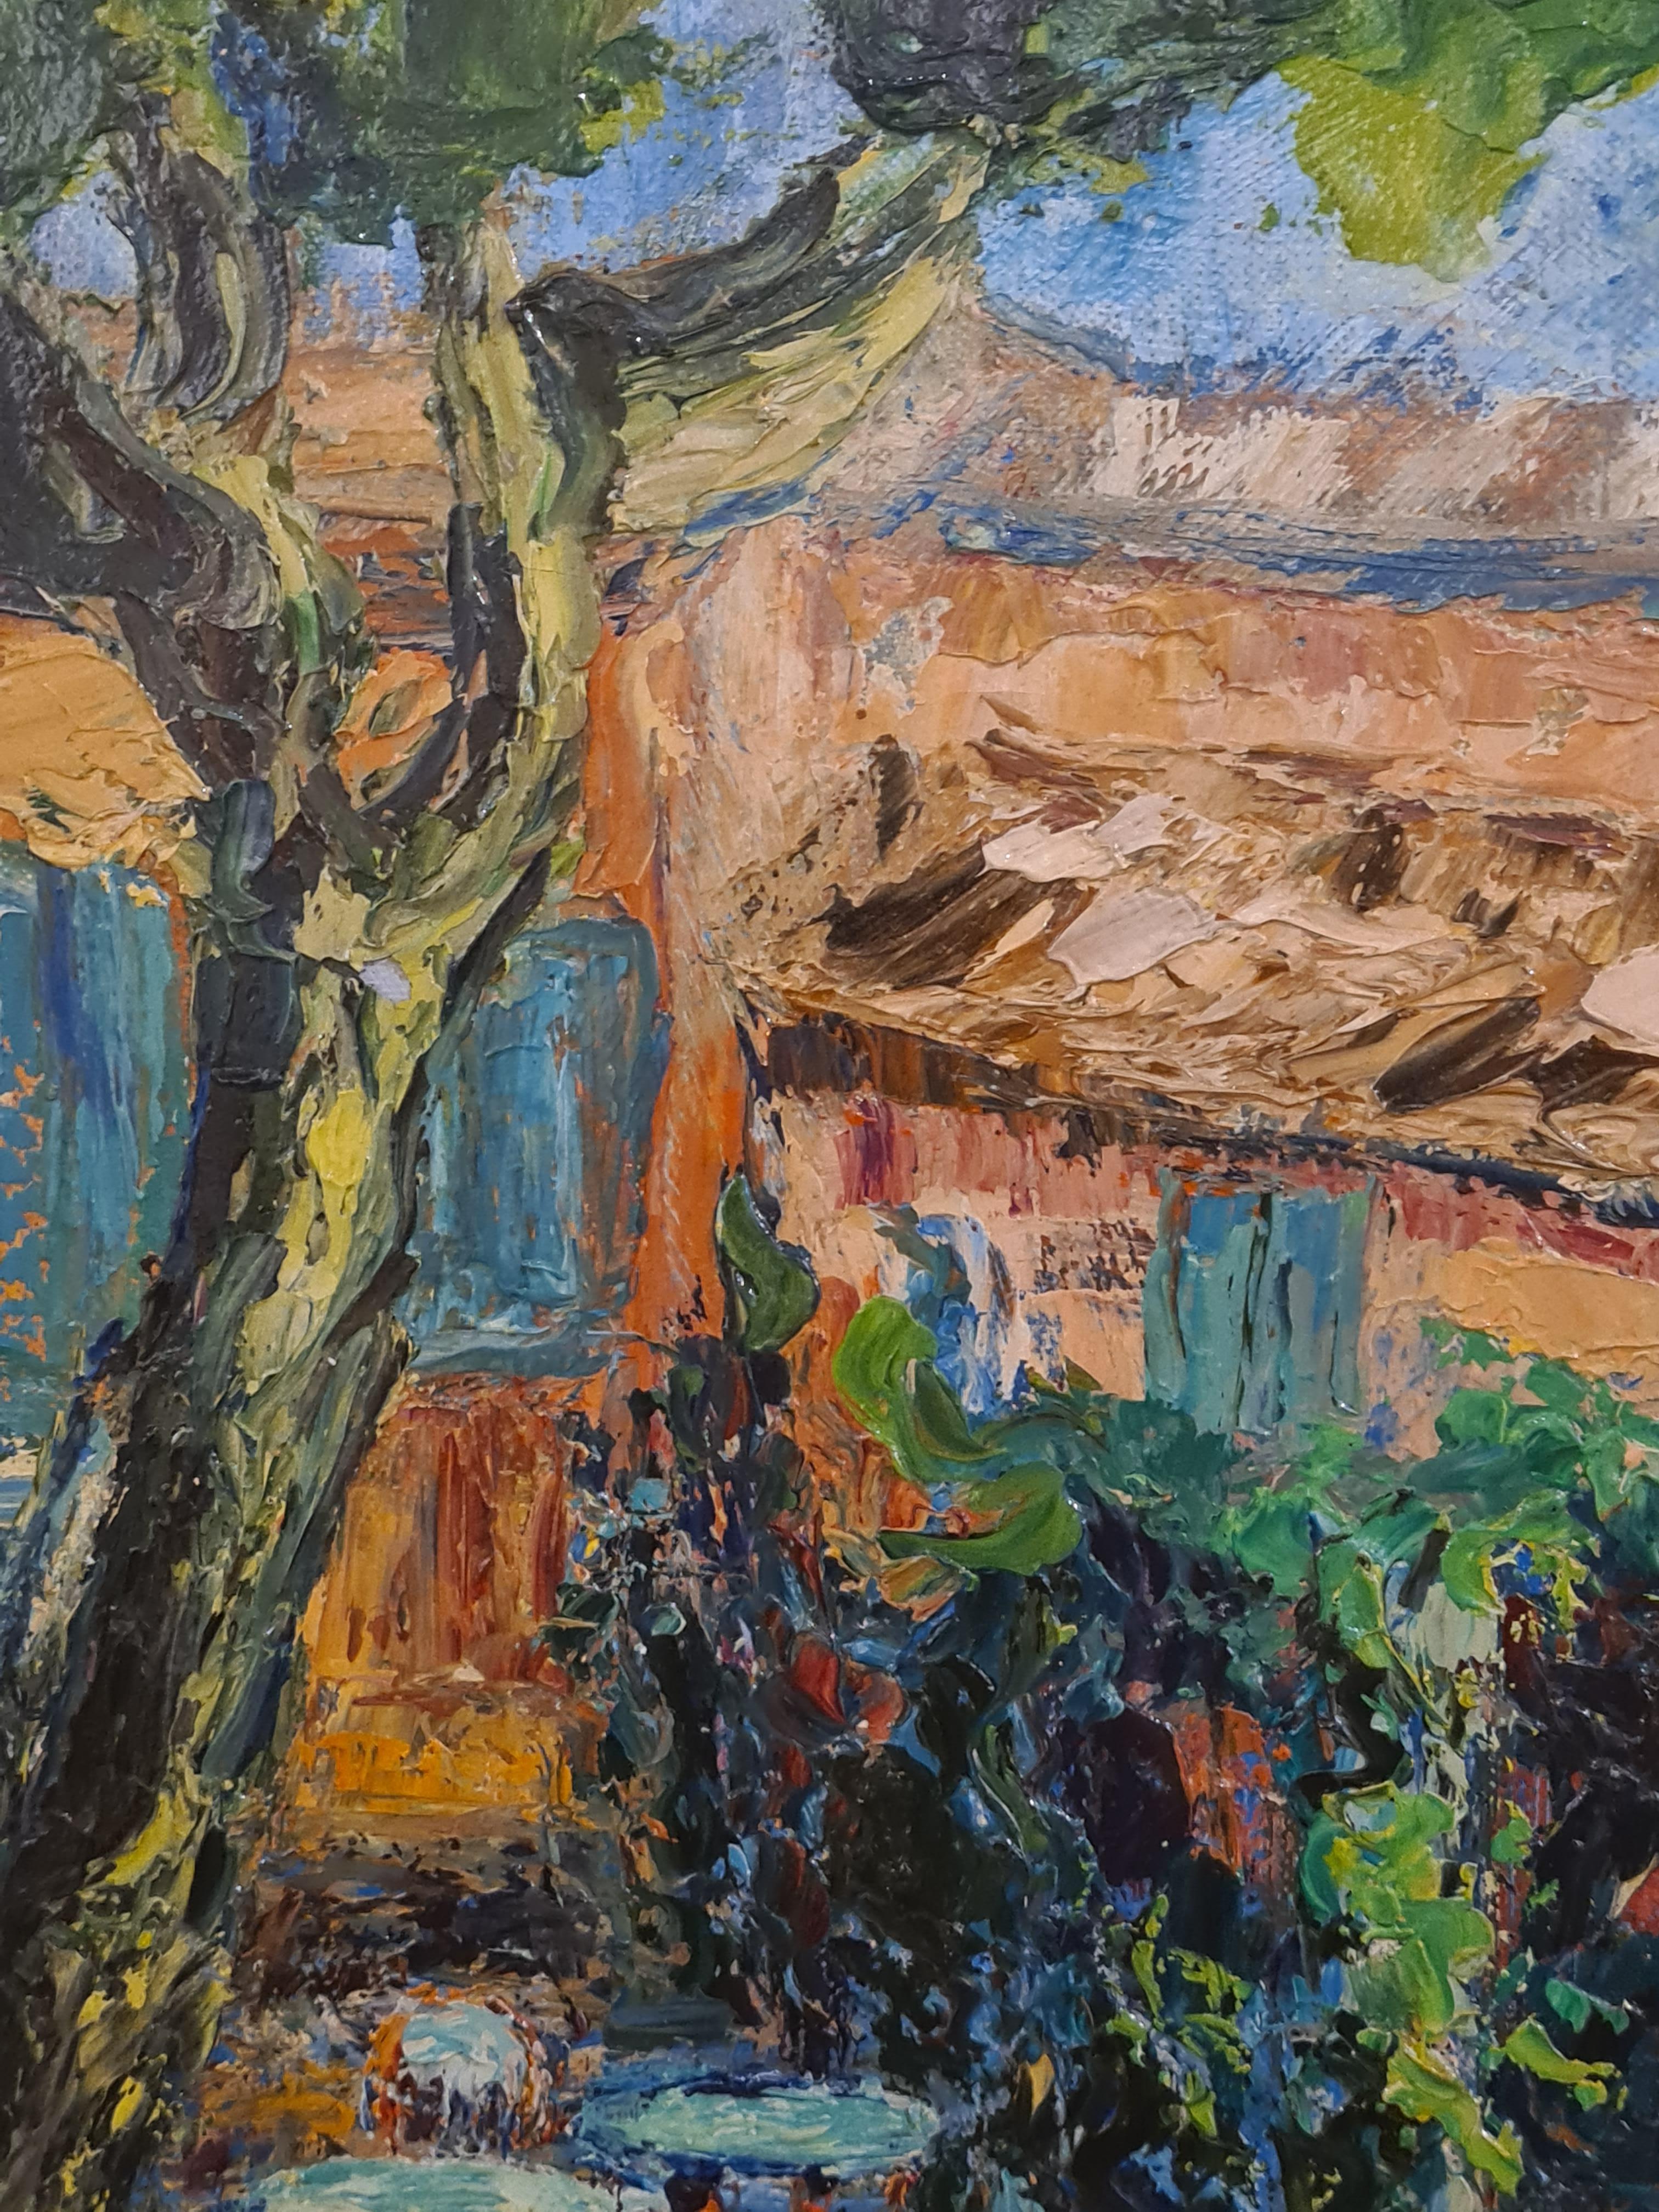 Mid Century French oil on canvas view of the square in Ramatuelle, South of France by Maria Tordo. Signed bottom right, resigned, dated, titled and other details to the back of the canvas. Presented in fine Montparnasse frame.

A wonderful colourful